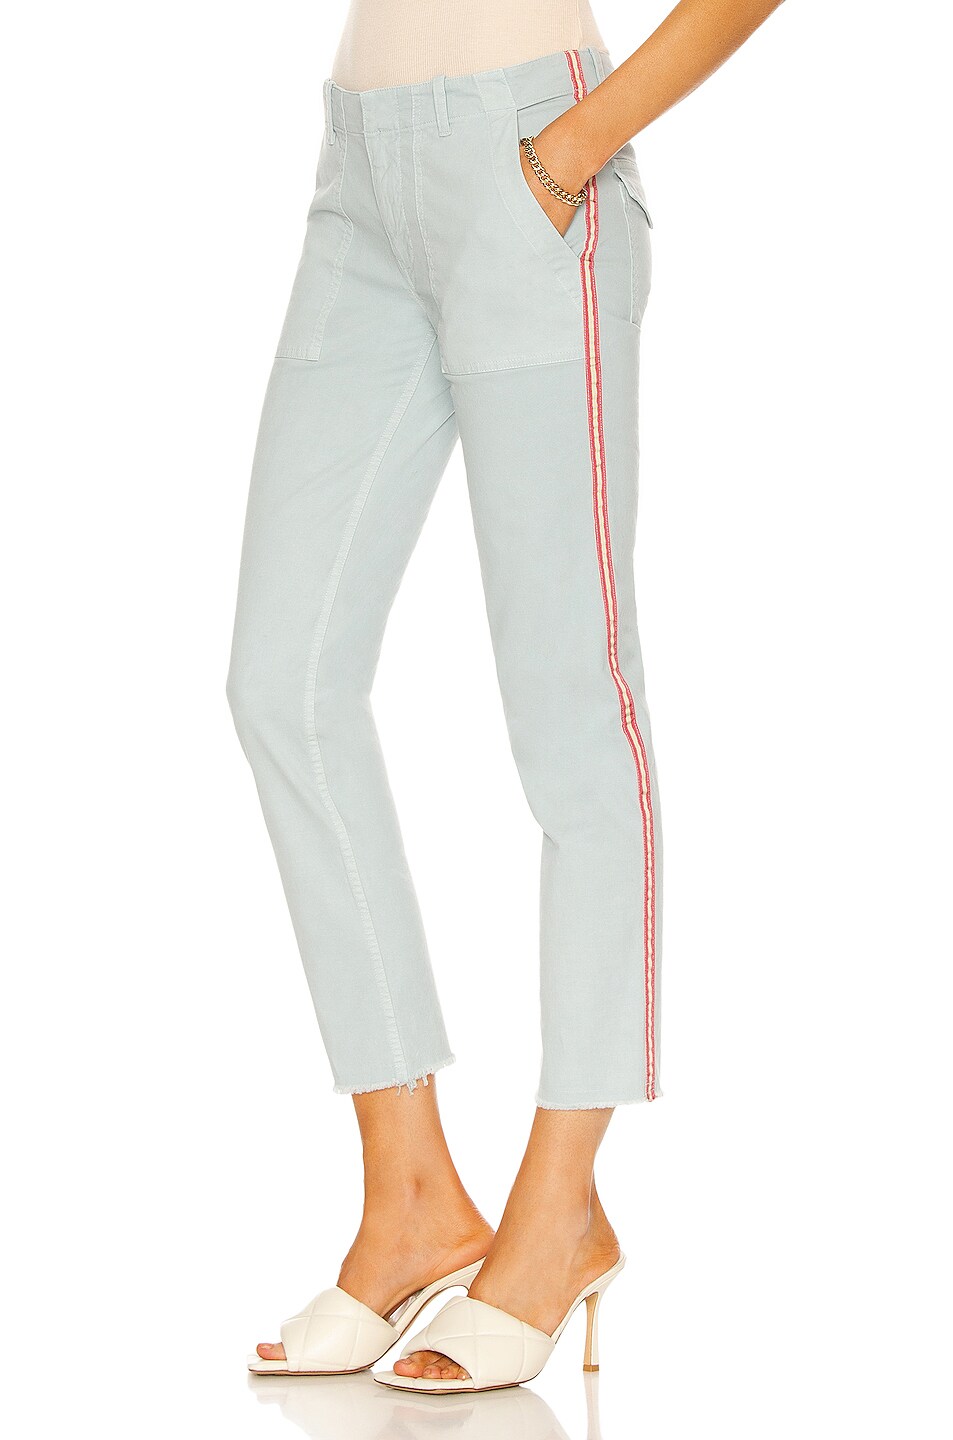 Image 1 of NILI LOTAN Jenna Pant with Tape in Steel Blue & Ivory